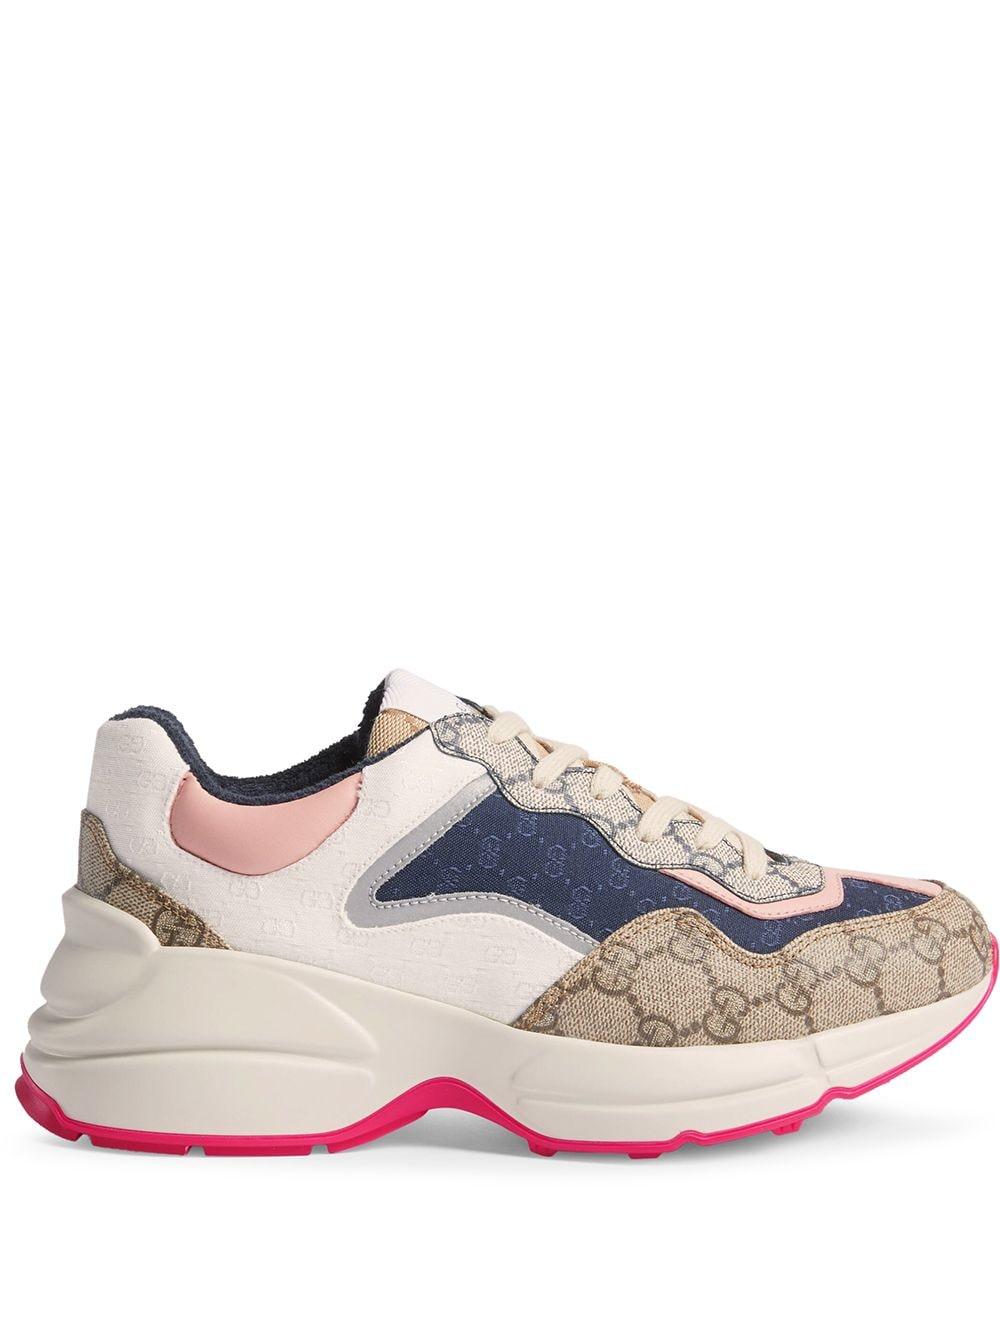 Gucci Rhyton GG-print Leather And Canvas Trainers - Save 15% - Lyst